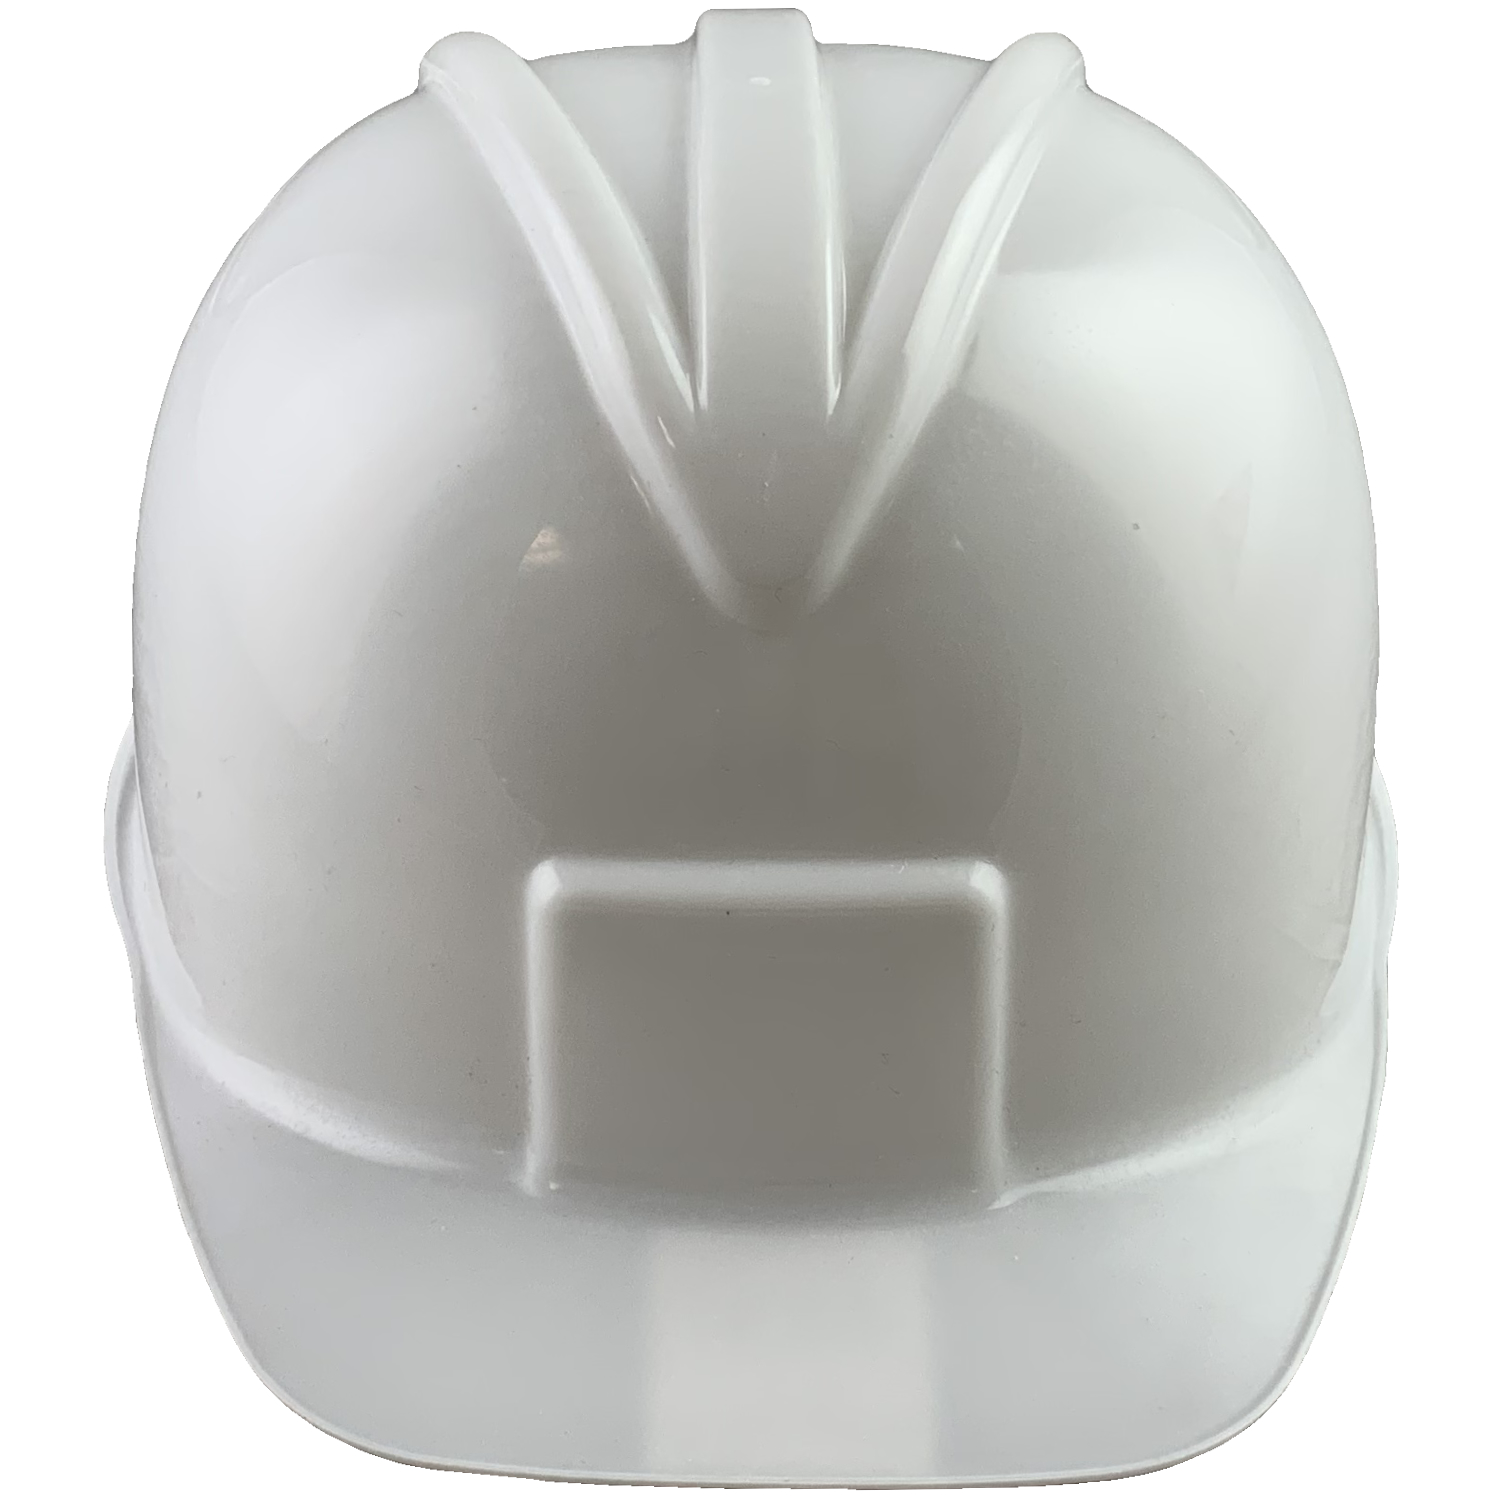 Detroit Tigers hard hats  Buy Online at T.A.S.C.O.